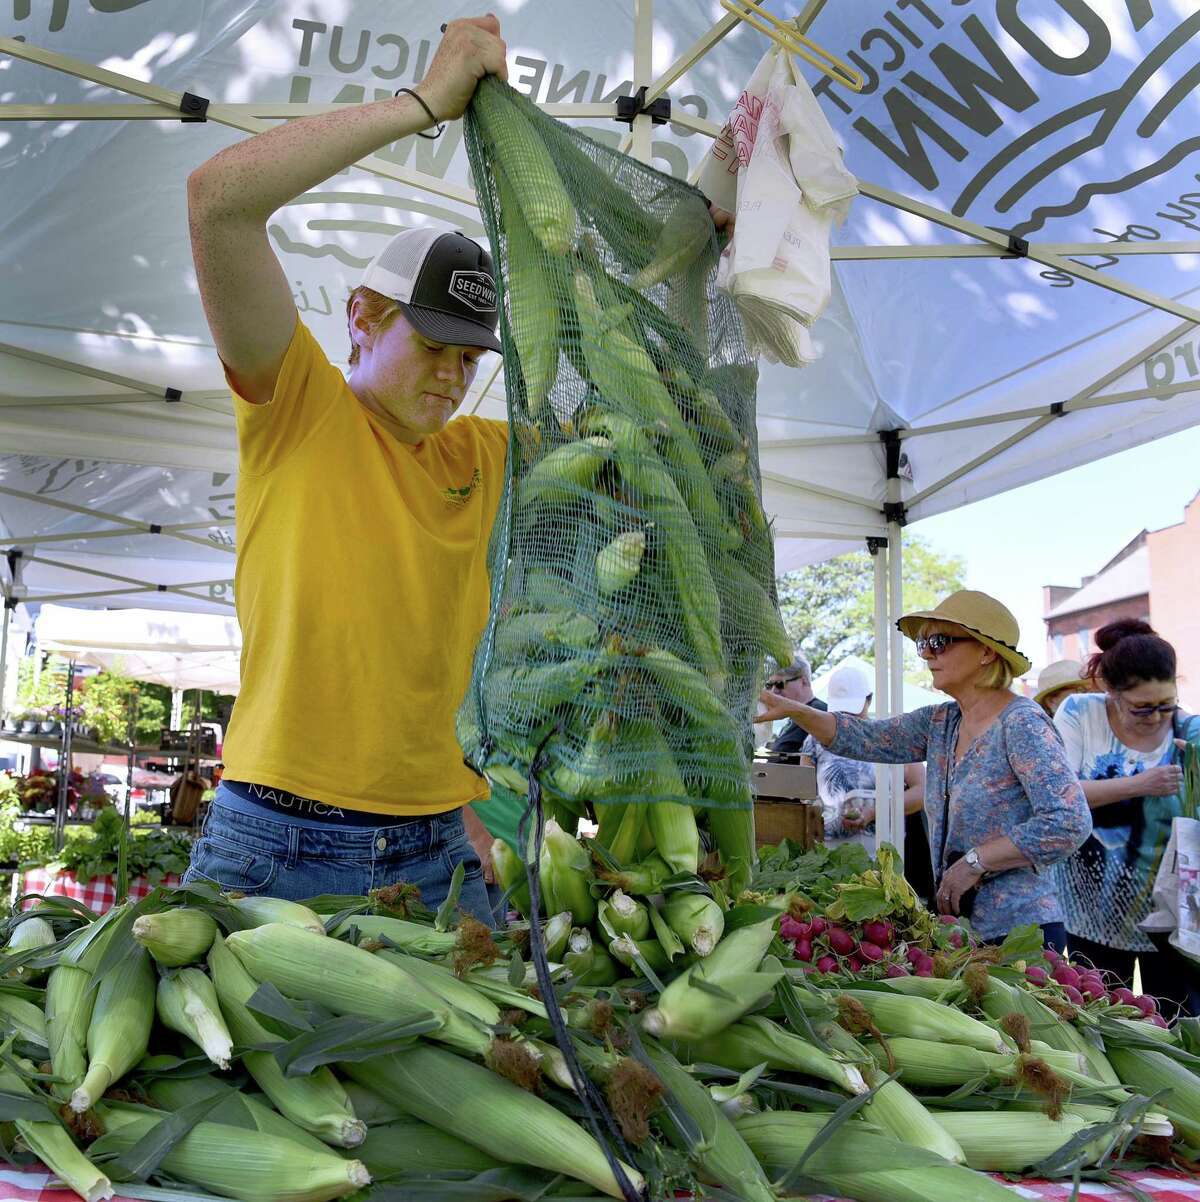 Aidan Schulz adds more fresh corn to Clatter Valley Farm's booth at the Danbury Farmers Market on Saturday morning. The market opened for the season in a new location, the CityCenter Green, Saturday, June 25, 2022.